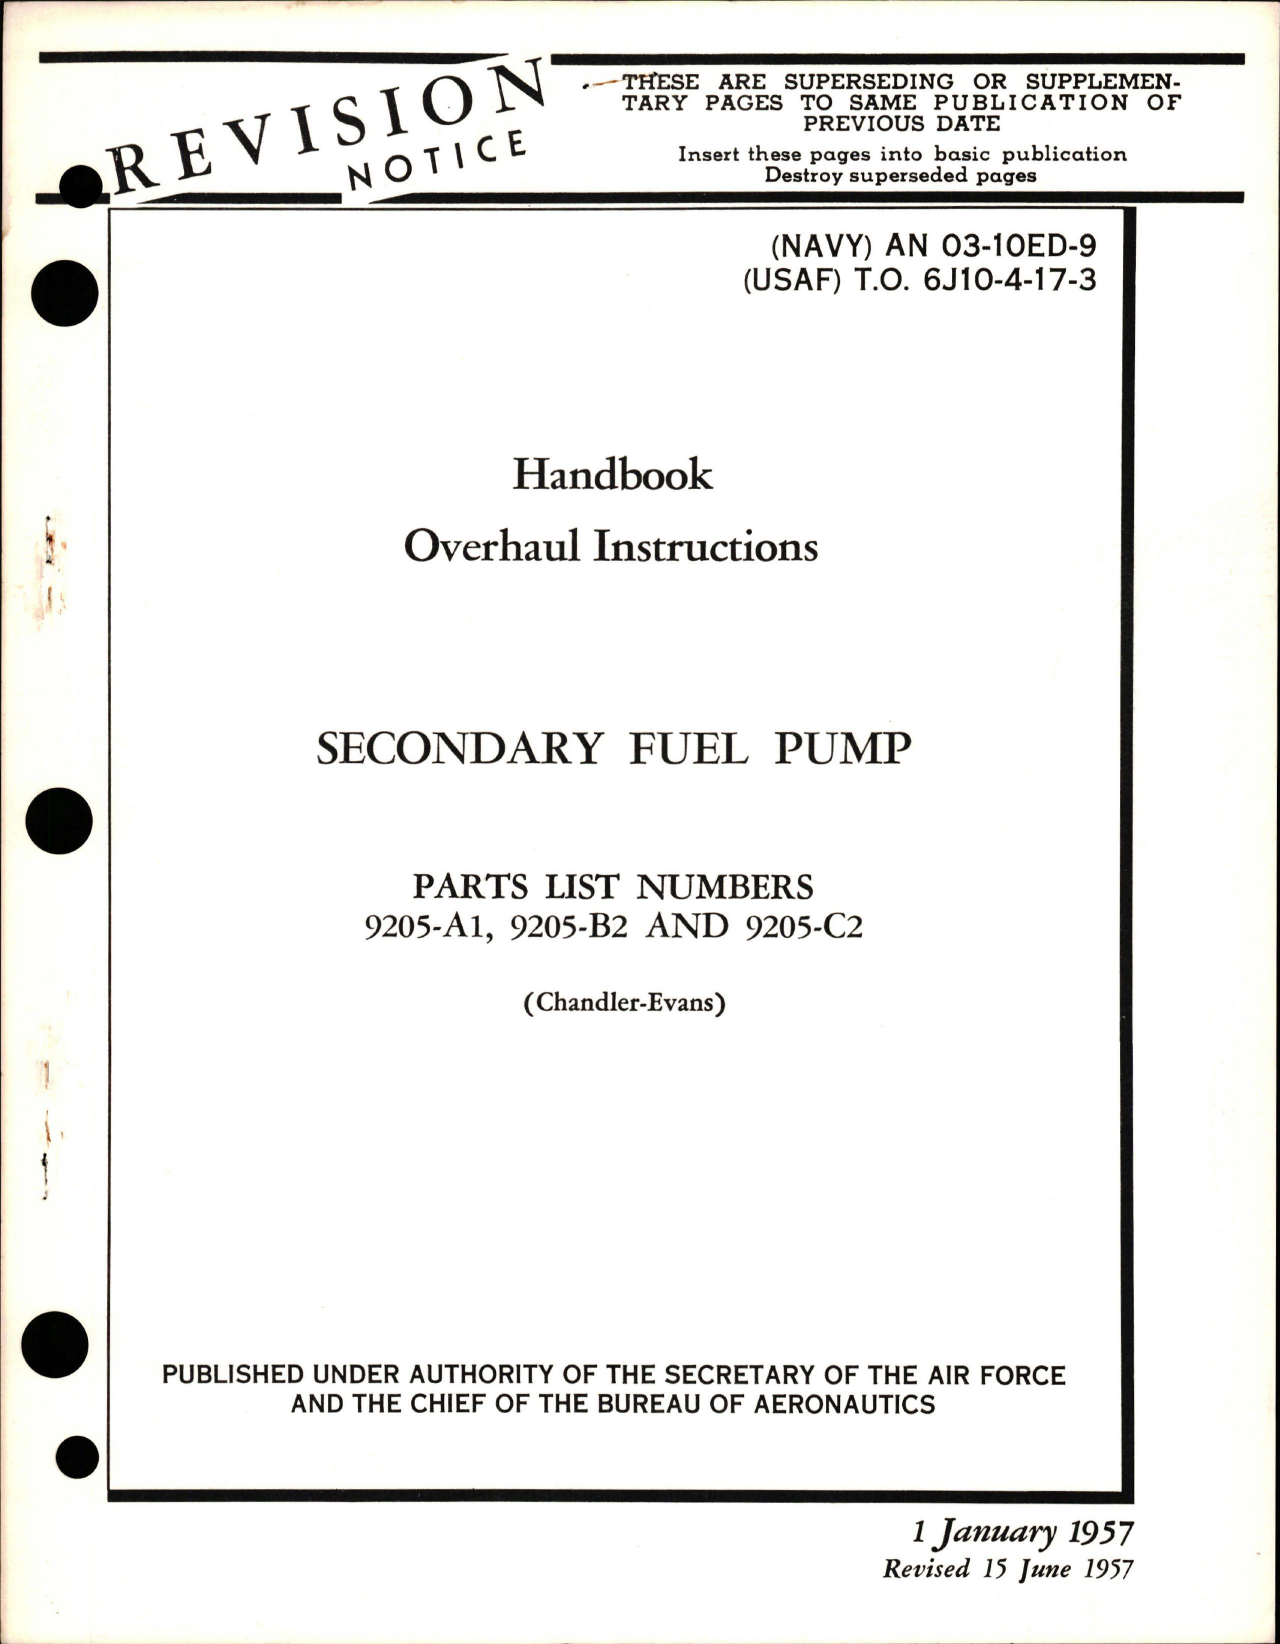 Sample page 1 from AirCorps Library document: Overhaul Instructions for Secondary Fuel Pump - Parts 9205-A1, 9205-B2 and 9205-C2